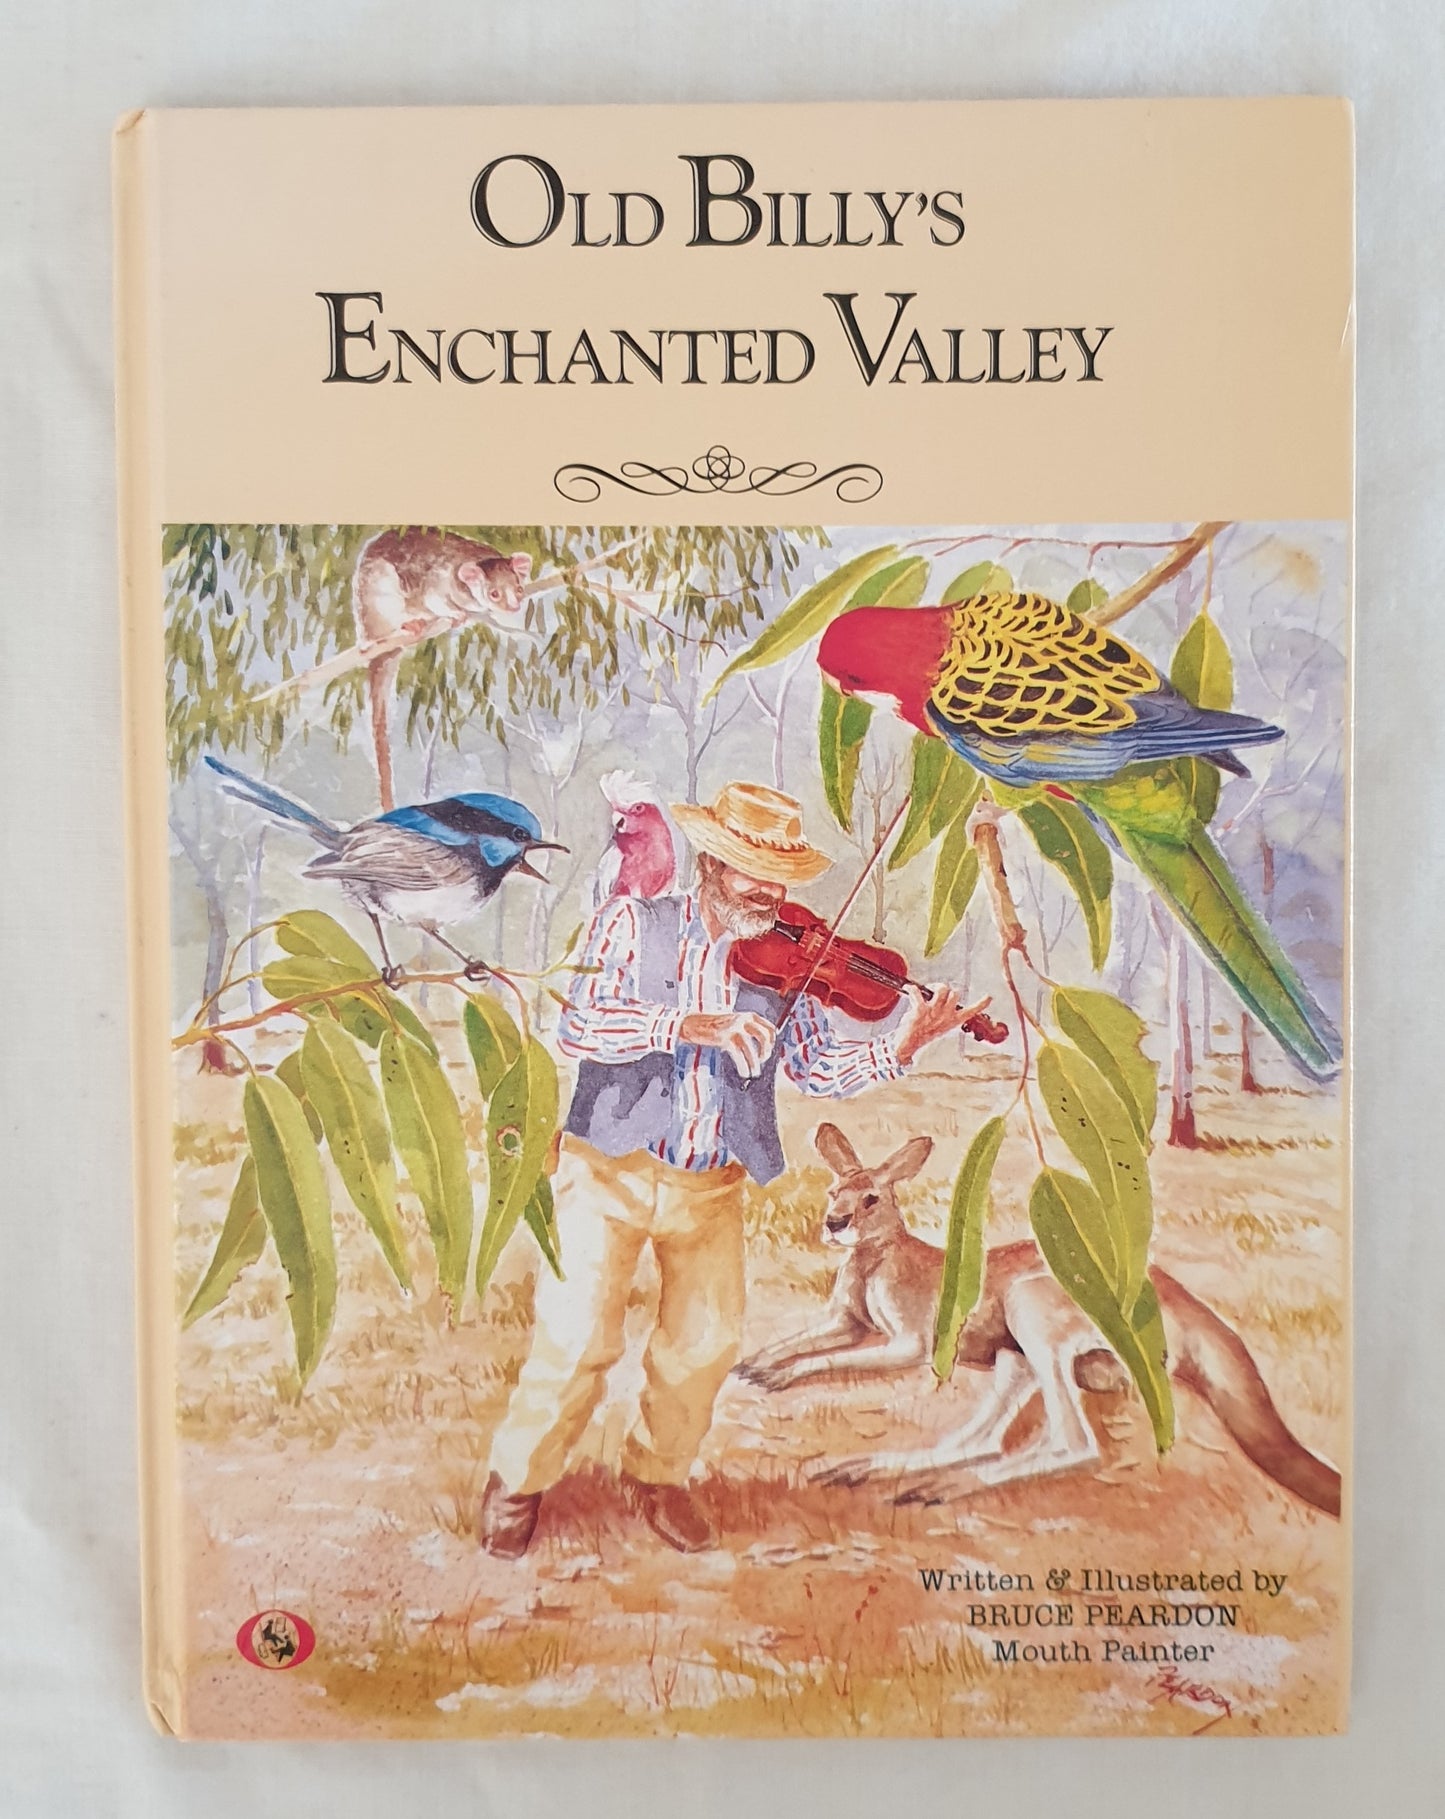 Old Billy's Enchanted Valley  Written & Illustrated by Bruce Peardon - Mouth Painter